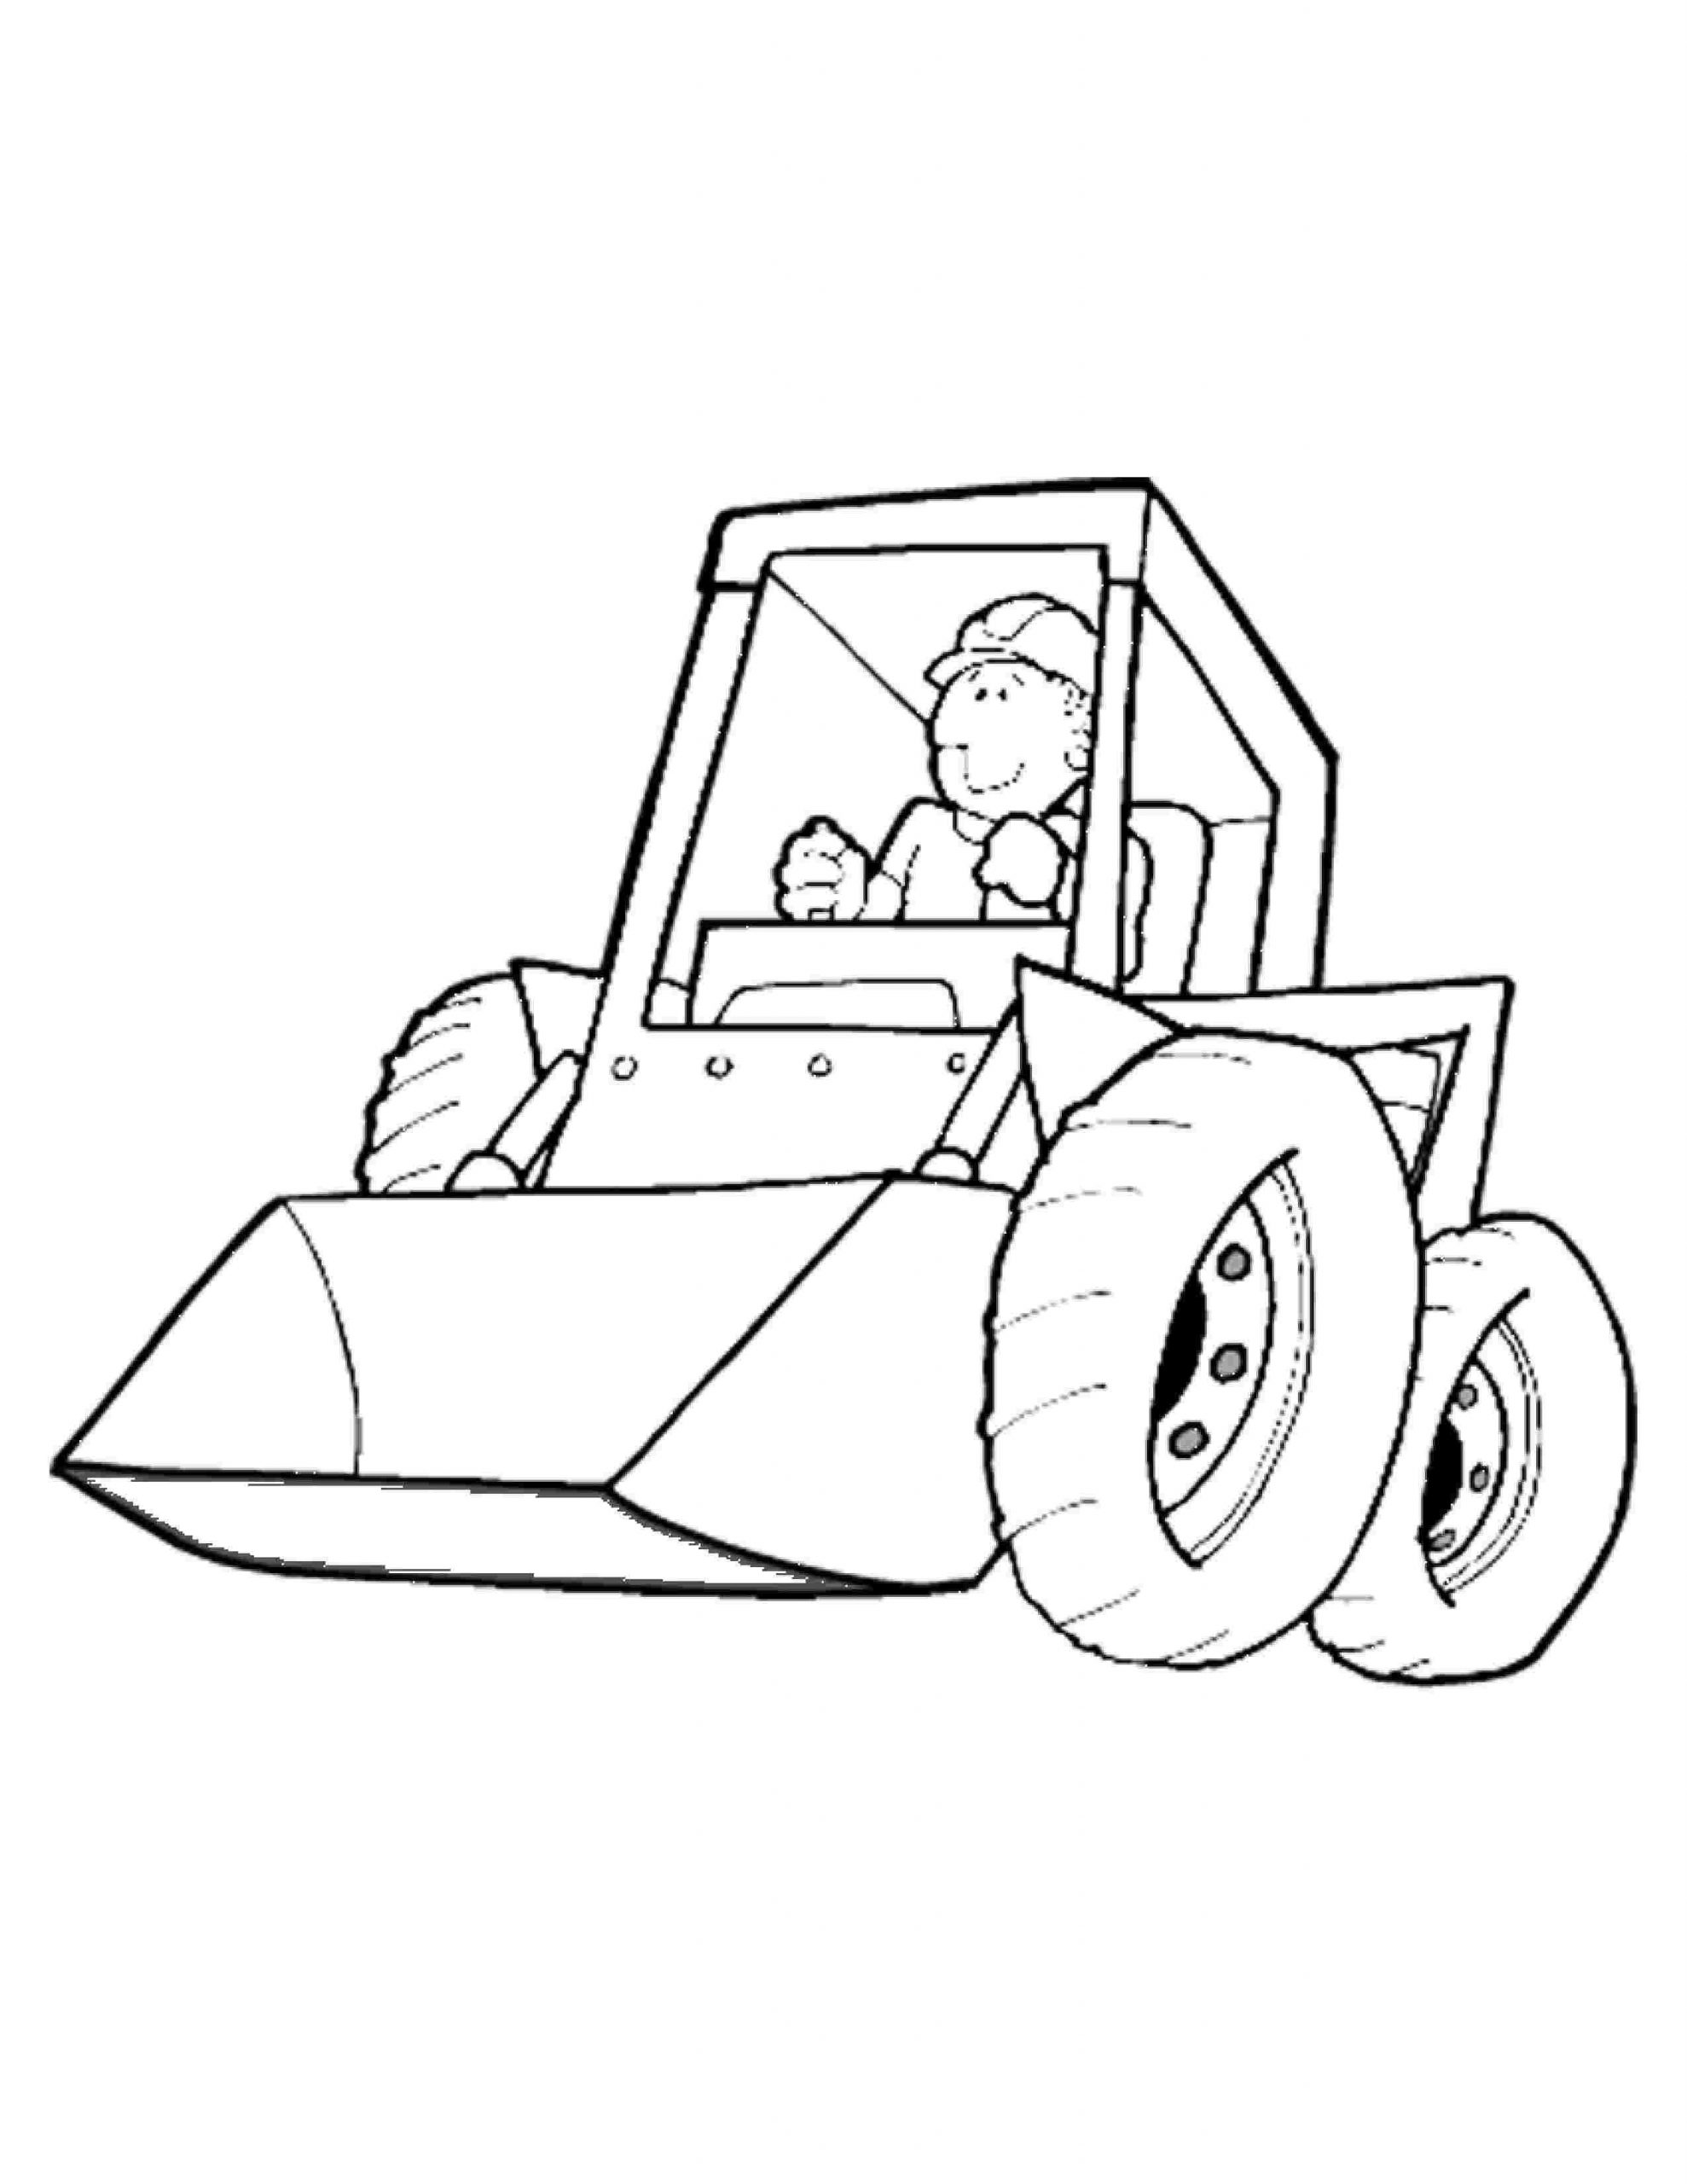 coloring books : Construction Vehicles Coloring Book Pages Construction  Vehicles Coloring Pages Free‚ Construction Truck Coloring Pages Free‚  coloring bookss